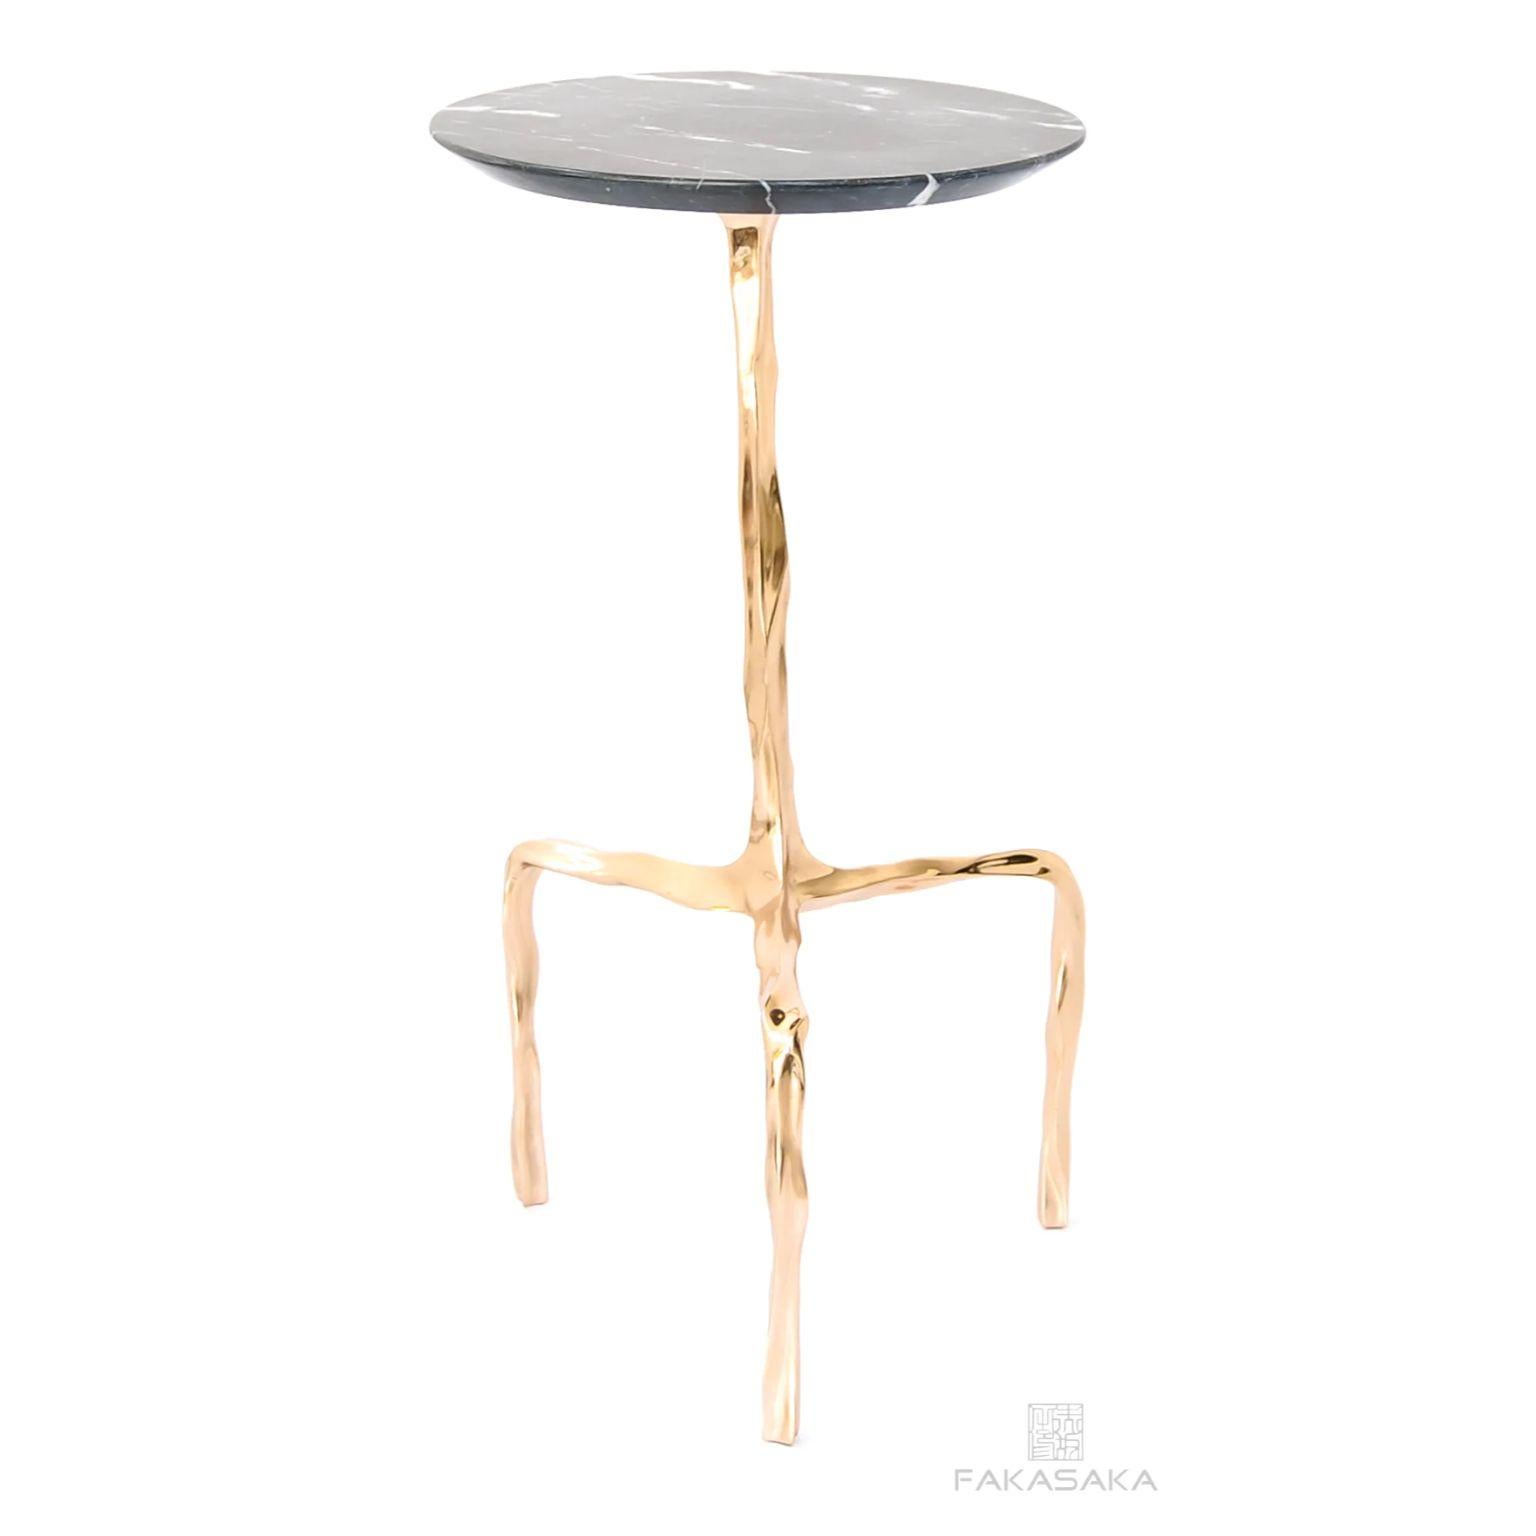 Aretha drink table with Nero Marquina Marble top by Fakasaka Design.
Dimensions: W 30 cm D 30 cm H 58 cm.
Materials: polished bronze base, Nero Marquina marble top.
 
Also available in different table top materials:
Nero Marquina Marble